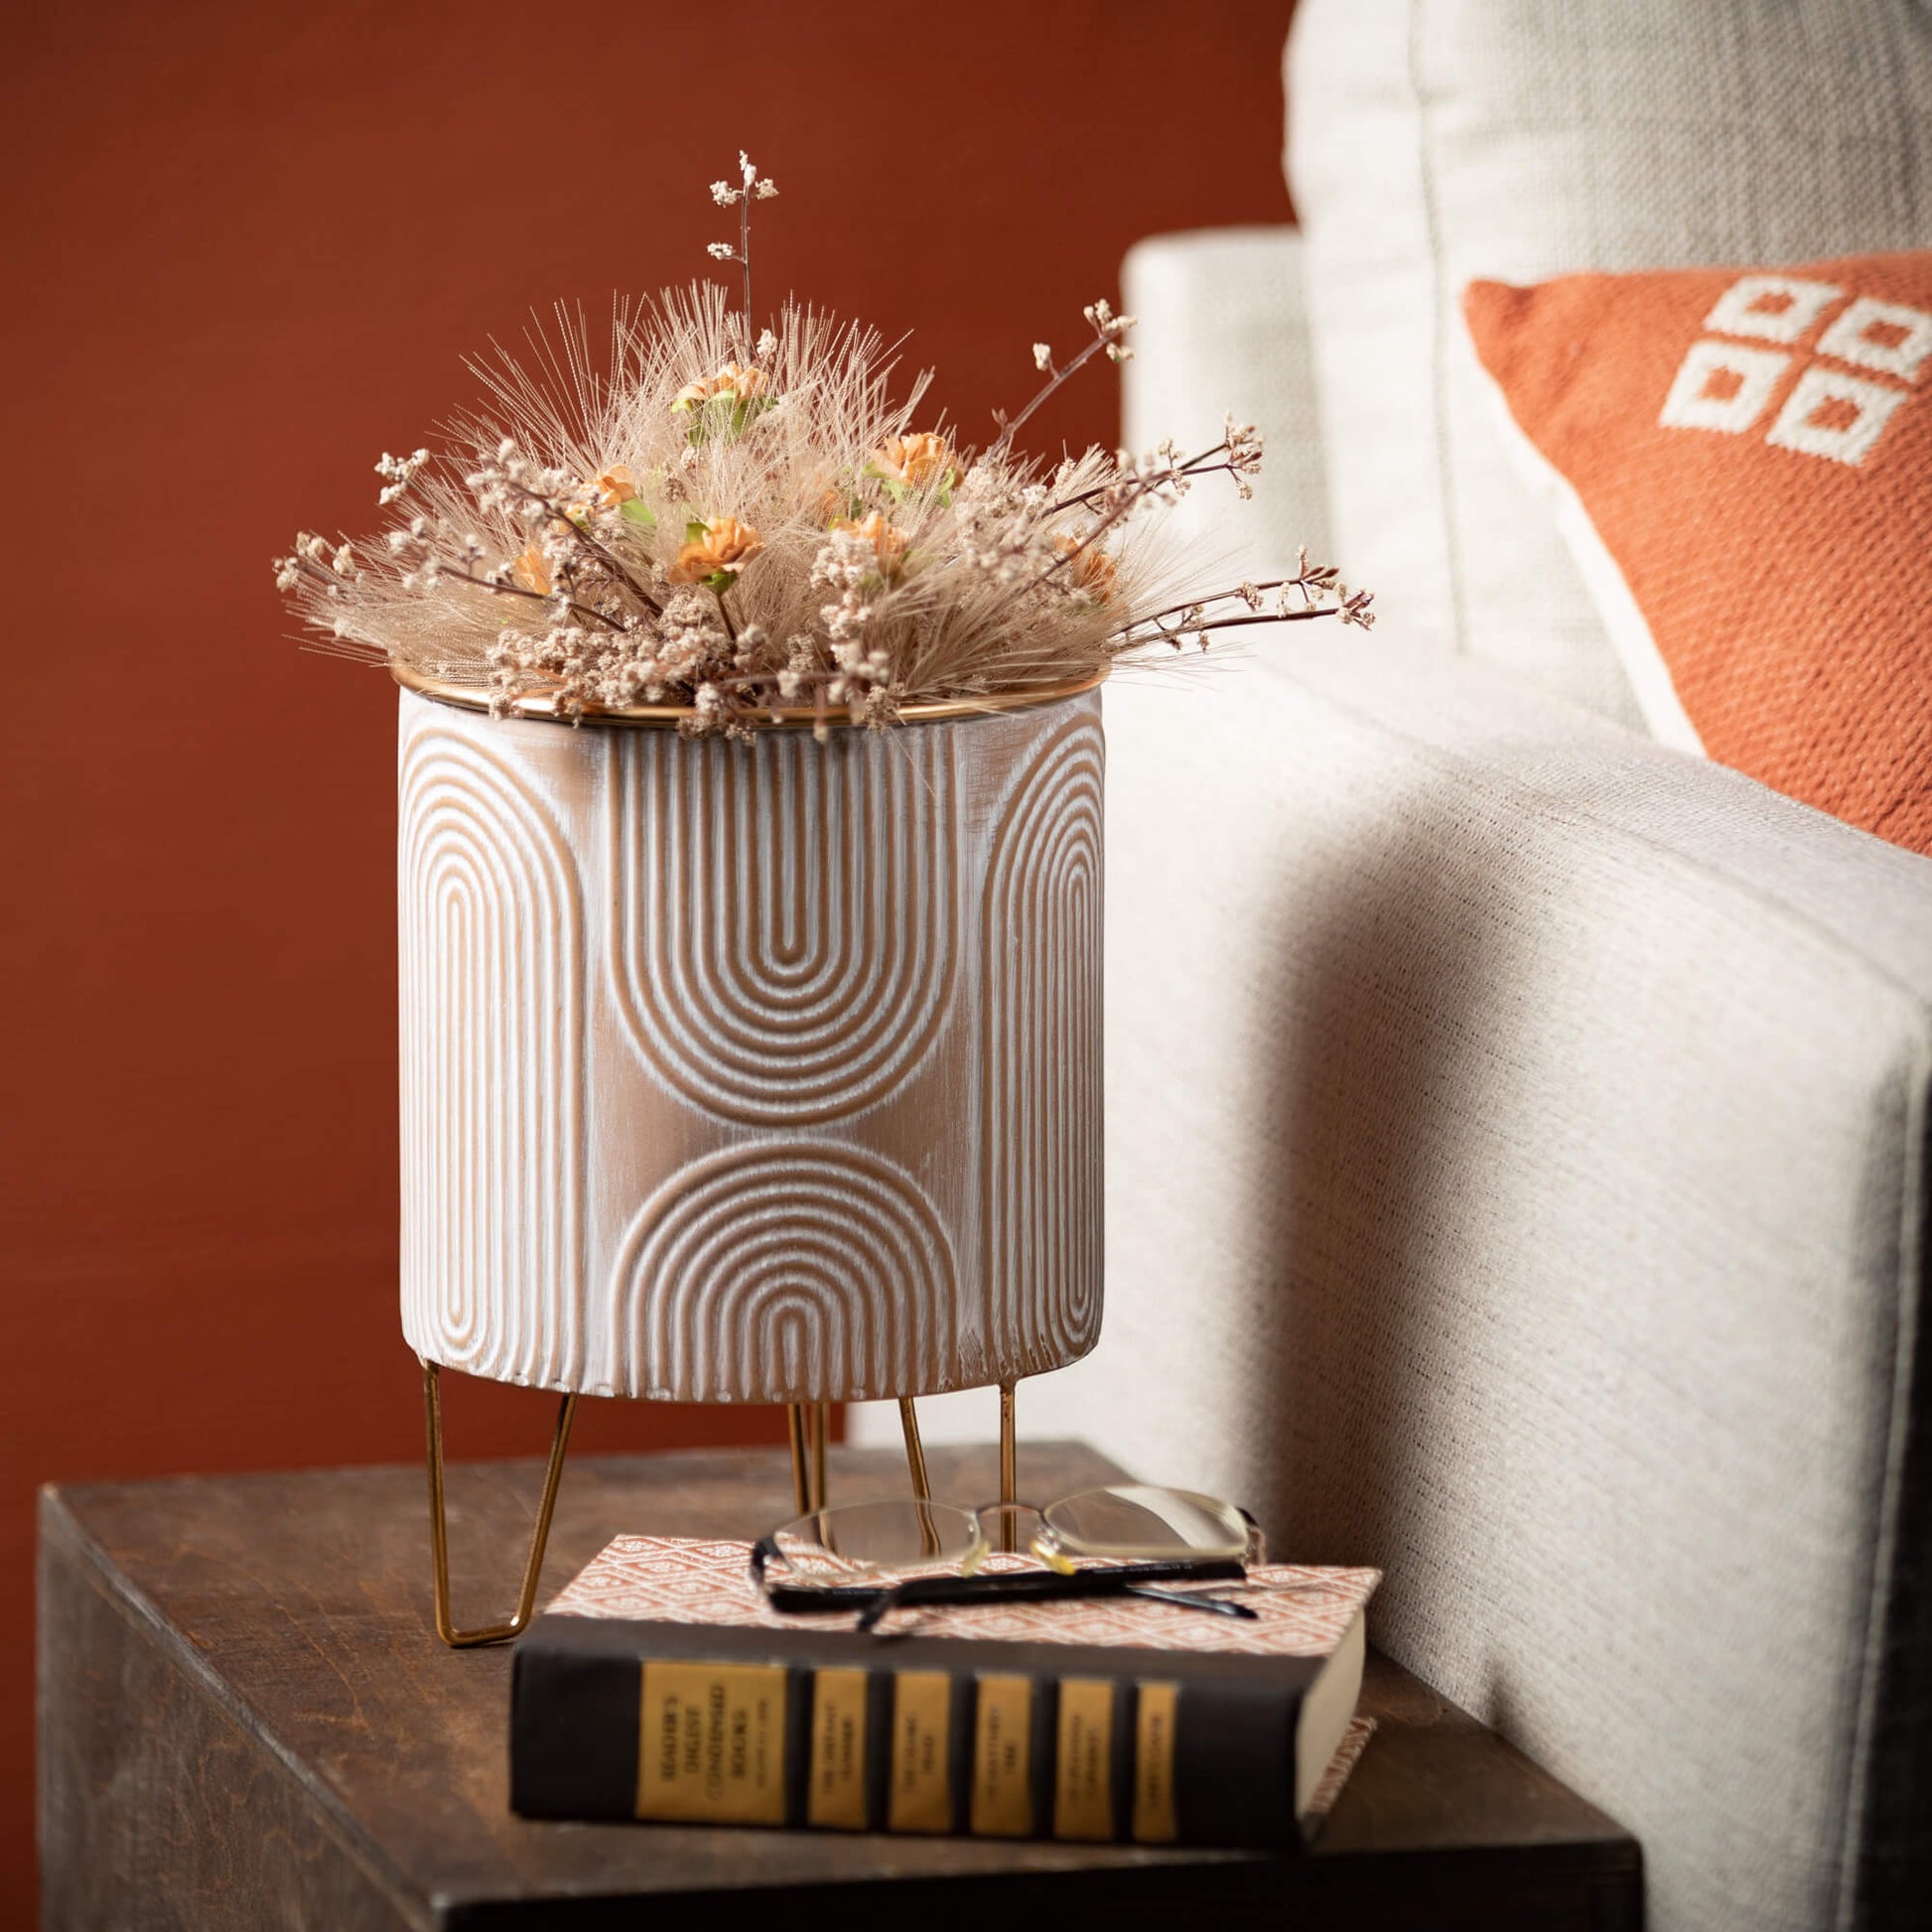 planter filled with grasses and berries set on a side table next to a couch.